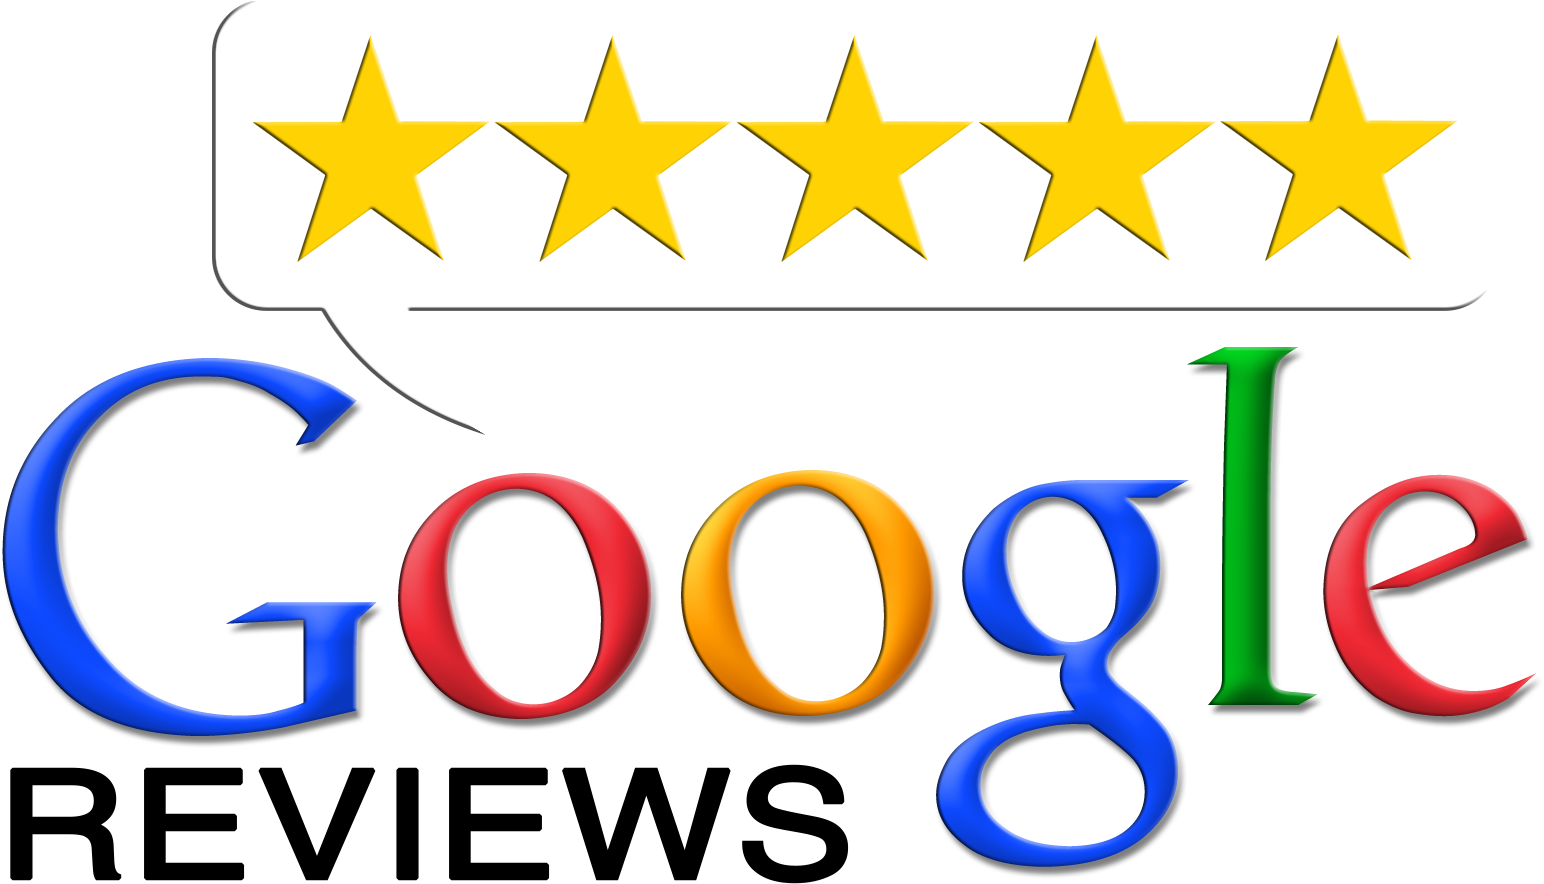 Google 5 star client rating